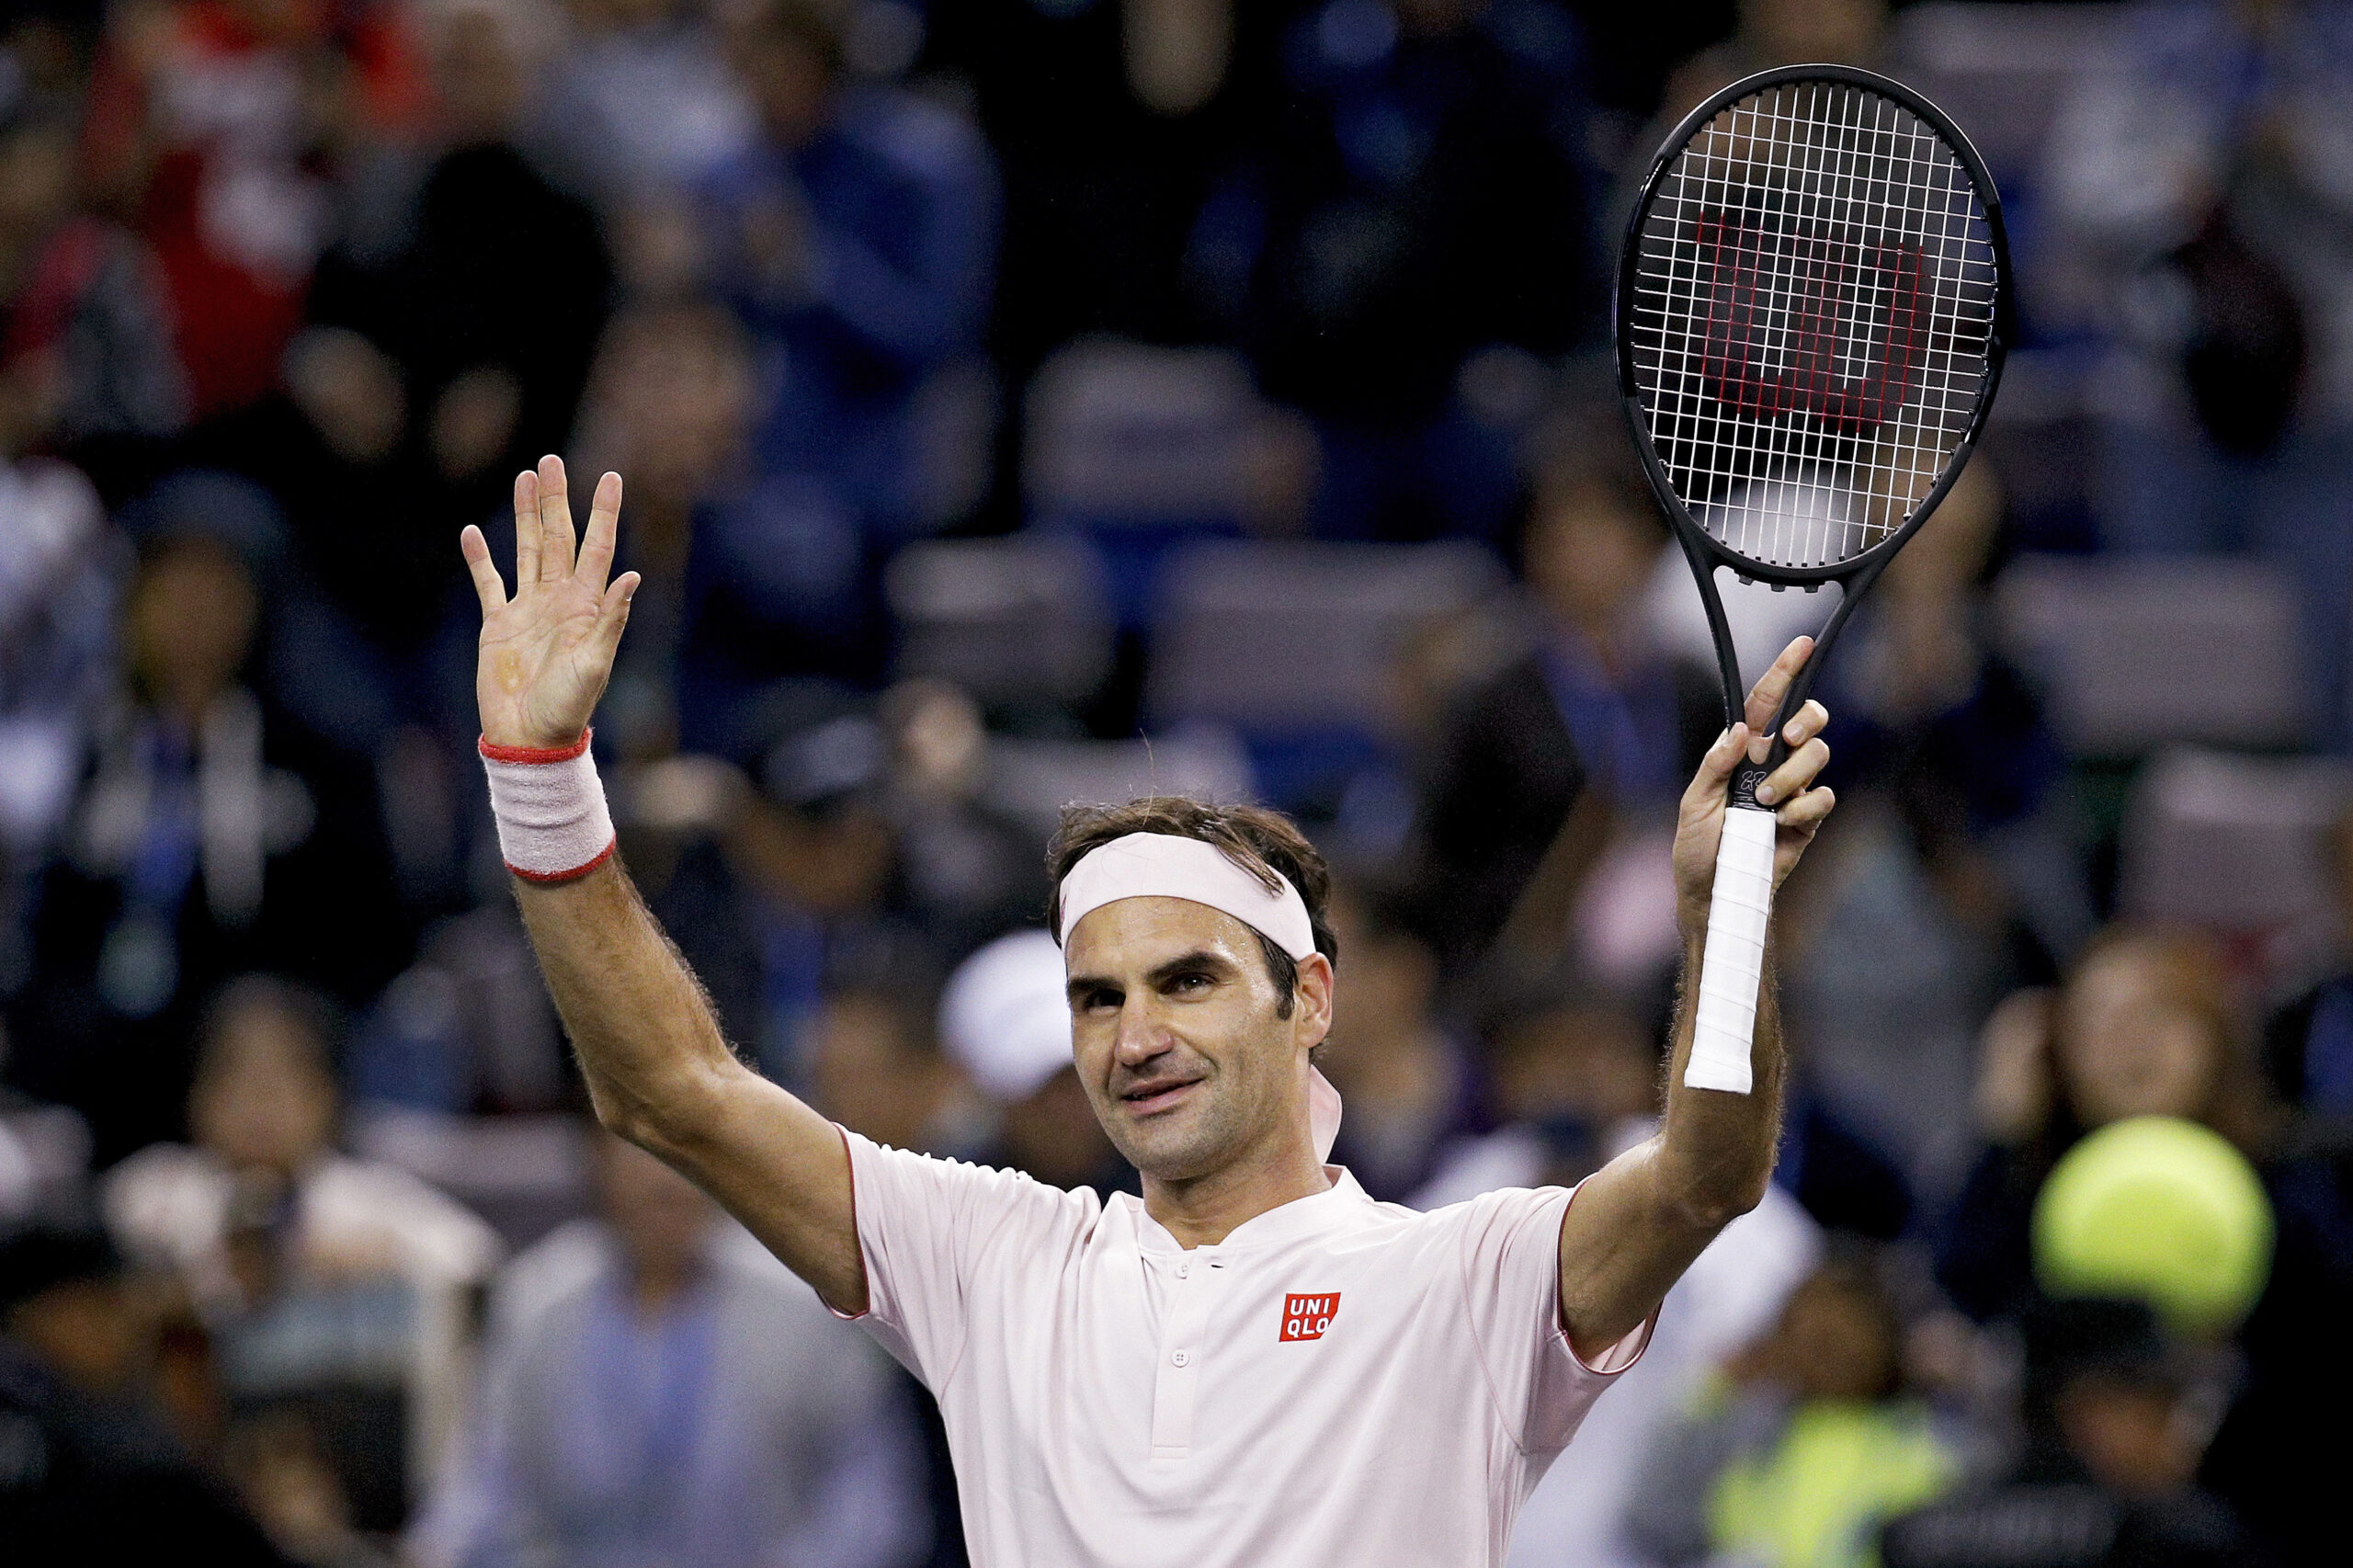 FILE - Roger Federer of Switzerland waves to spectators after defeating Daniil Medvedev of Russia in their men's singles match of the Shanghai Masters tennis tournament at Qizhong Forest Sports City Tennis Center in Shanghai, China, Oct. 10, 2018. Federer announced Thursday, Sept. 15, 2022 he is retiring from tennis. (AP Photo/Andy Wong, File)